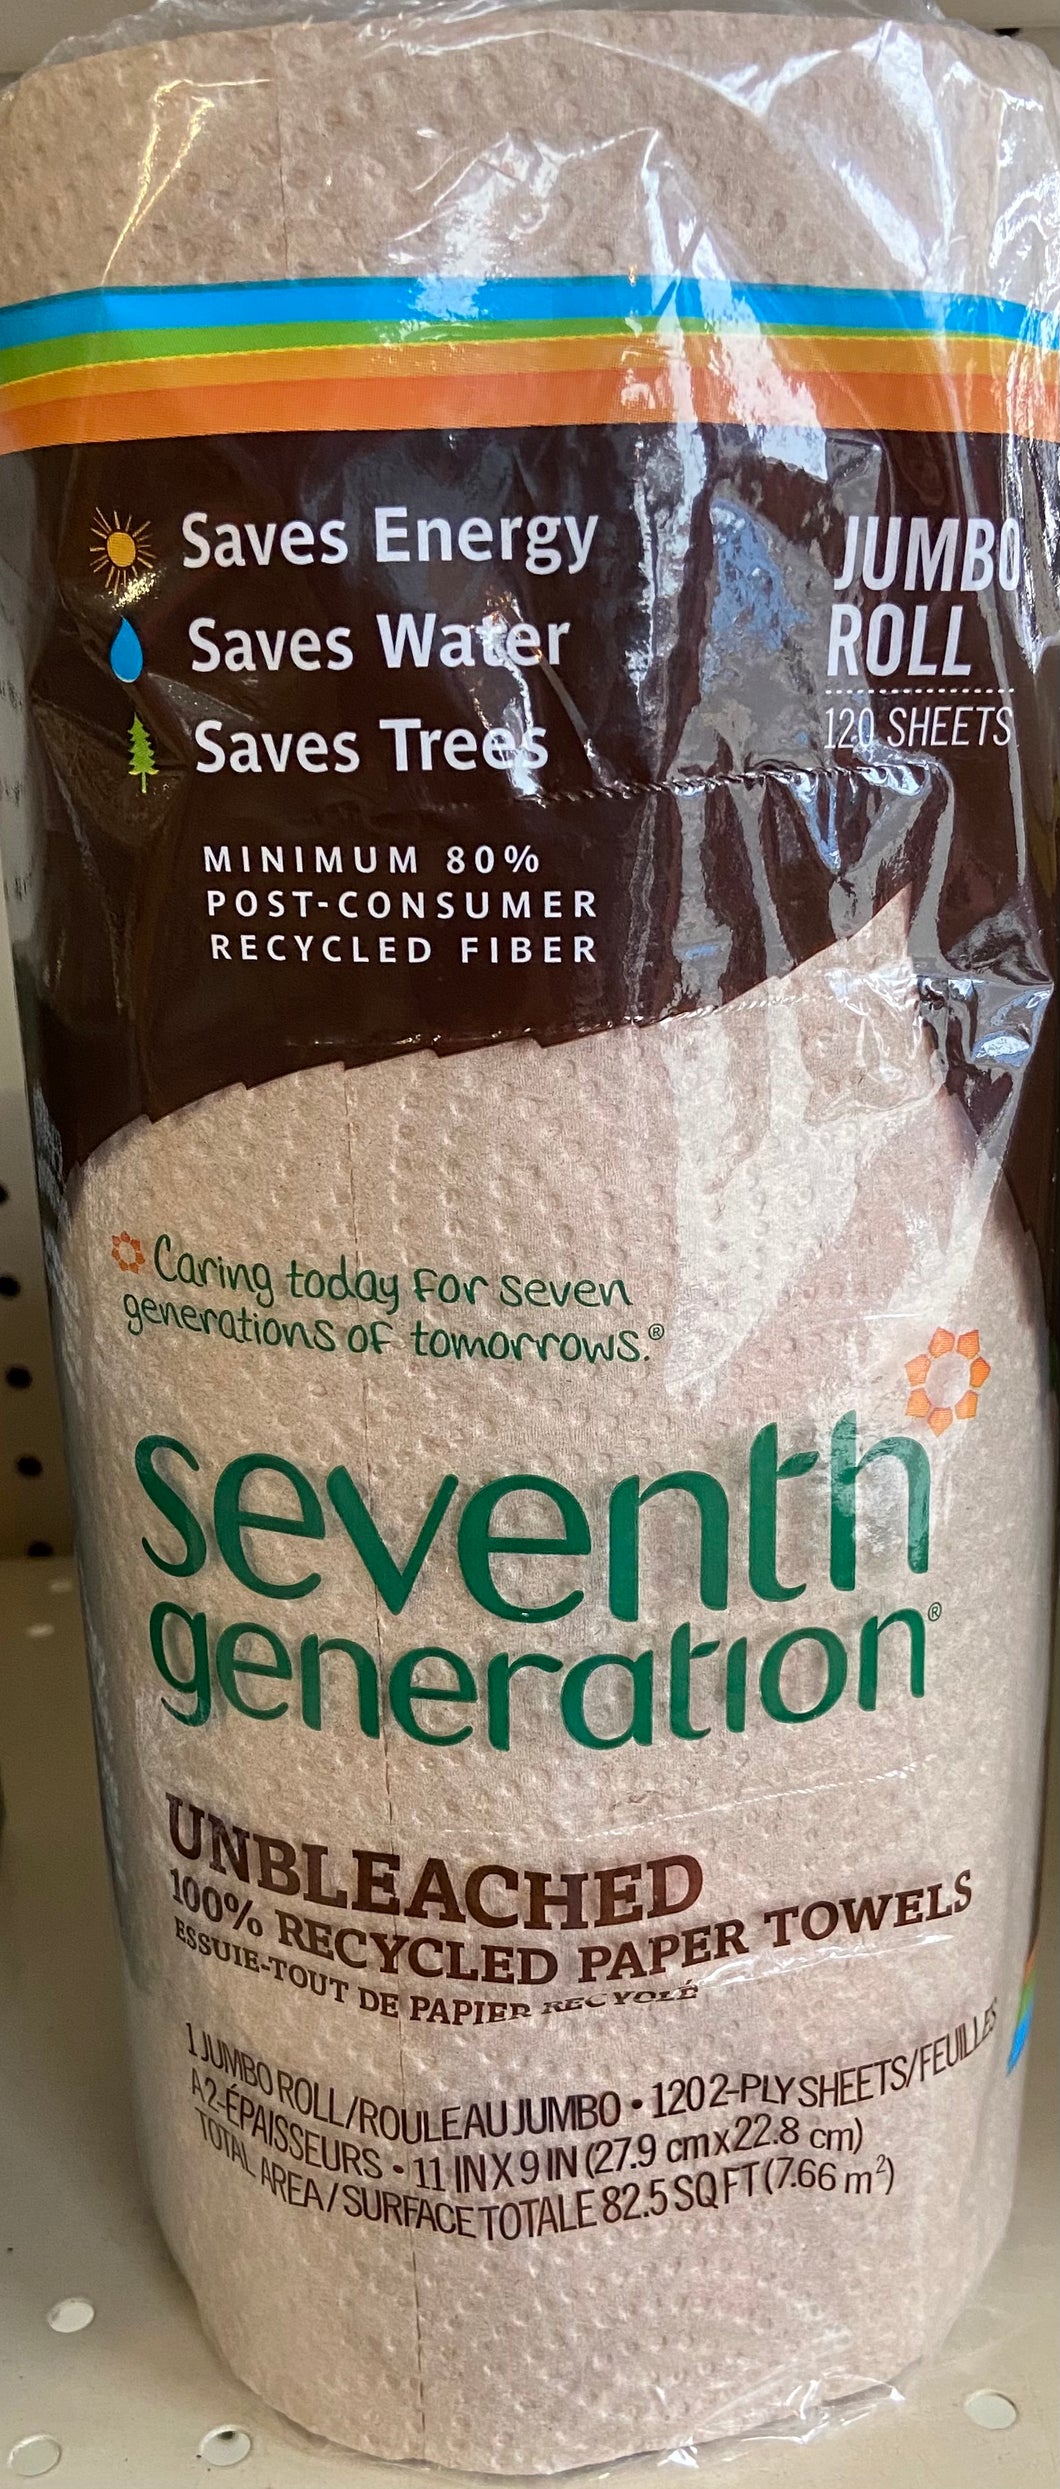 Paper Towels, Unbleached, 100% Recycled, Seventh Generation, single roll